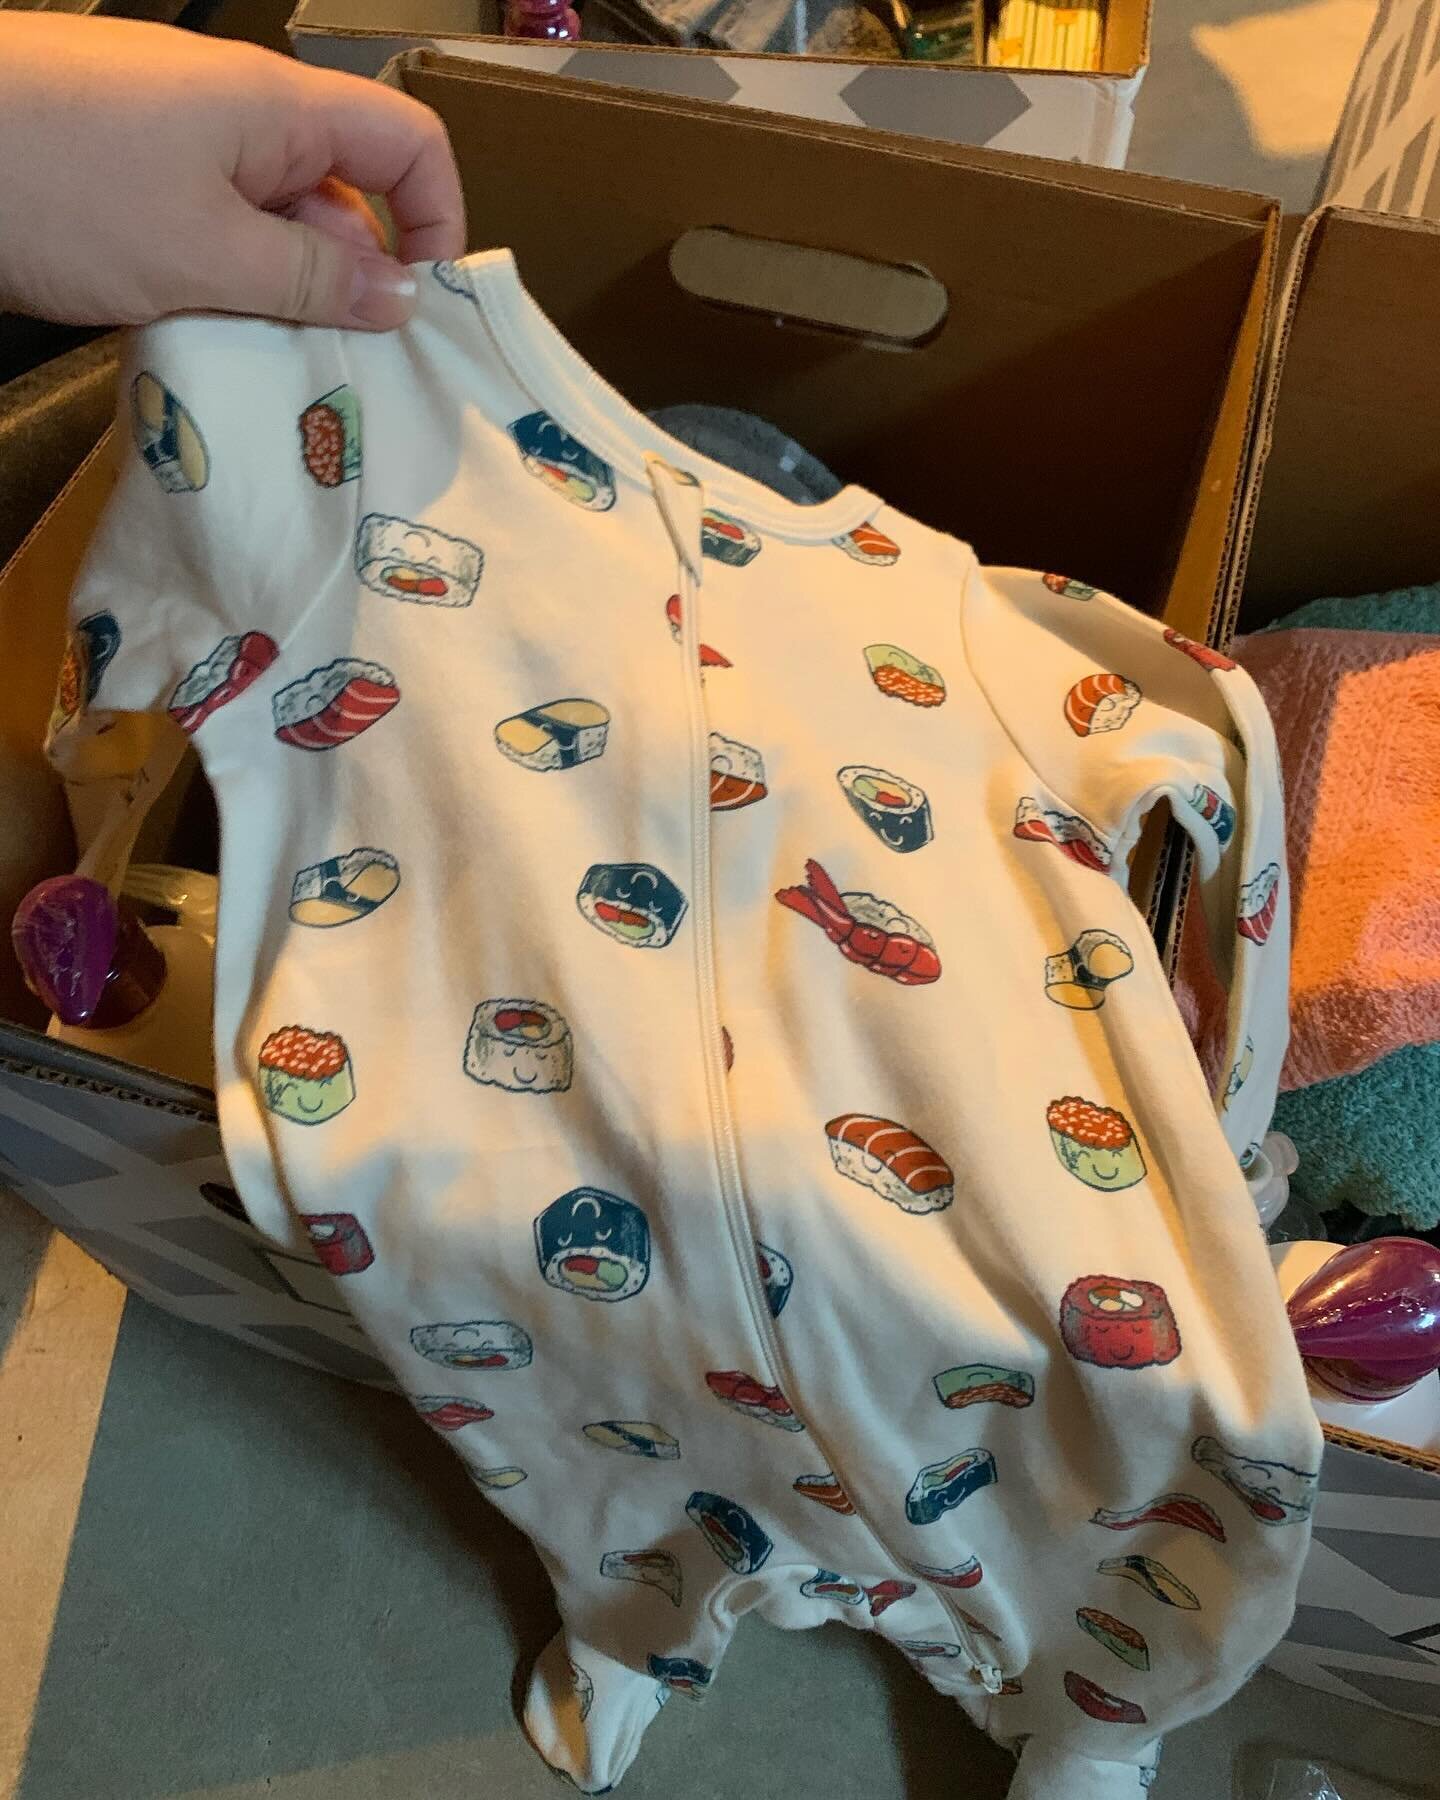 One lucky baby is going to get this sushi sleep and play @amandaesaliba &lsquo;s mom donated at the @daytonrighttolife baby shower this month. We are looking forward to blessing some new moms!